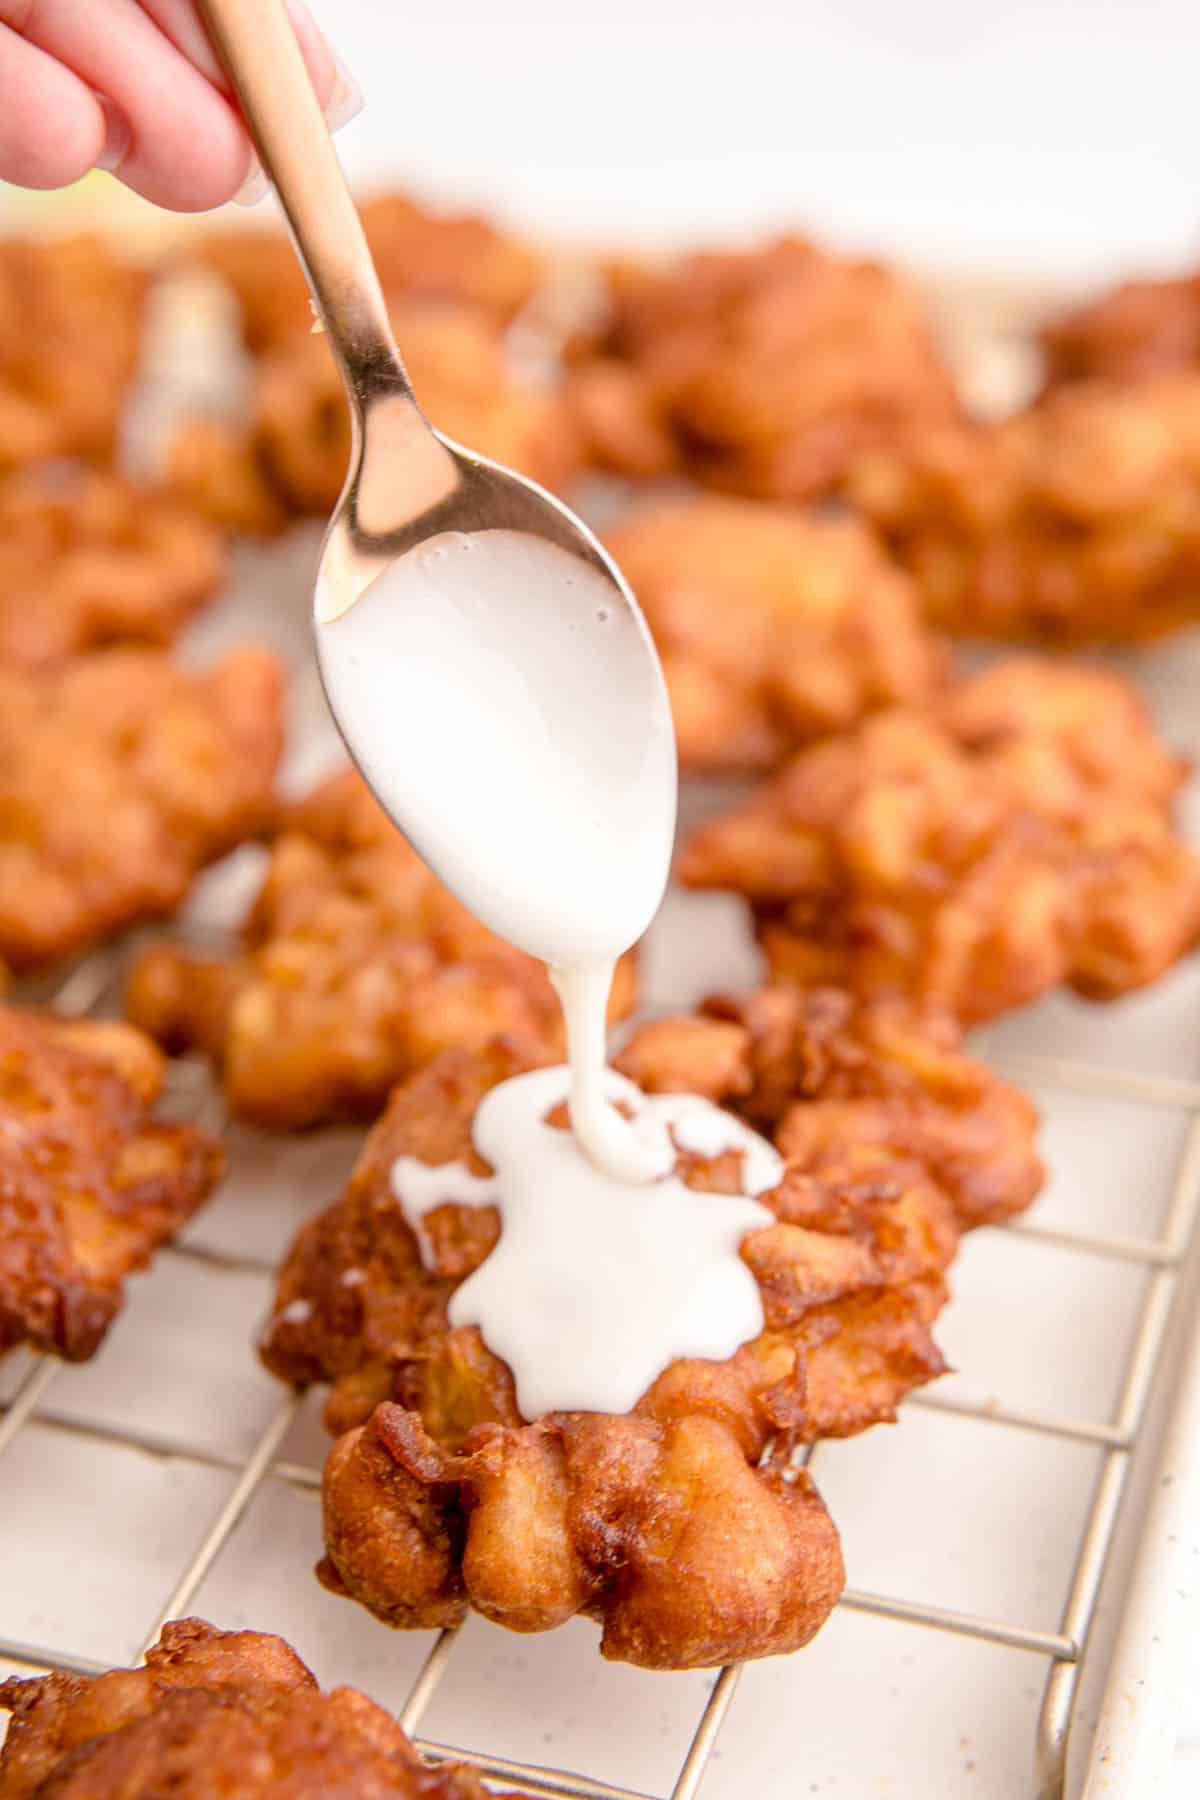 drizzling glaze from a gold spoon on top of fried apple fritters on a wire rack